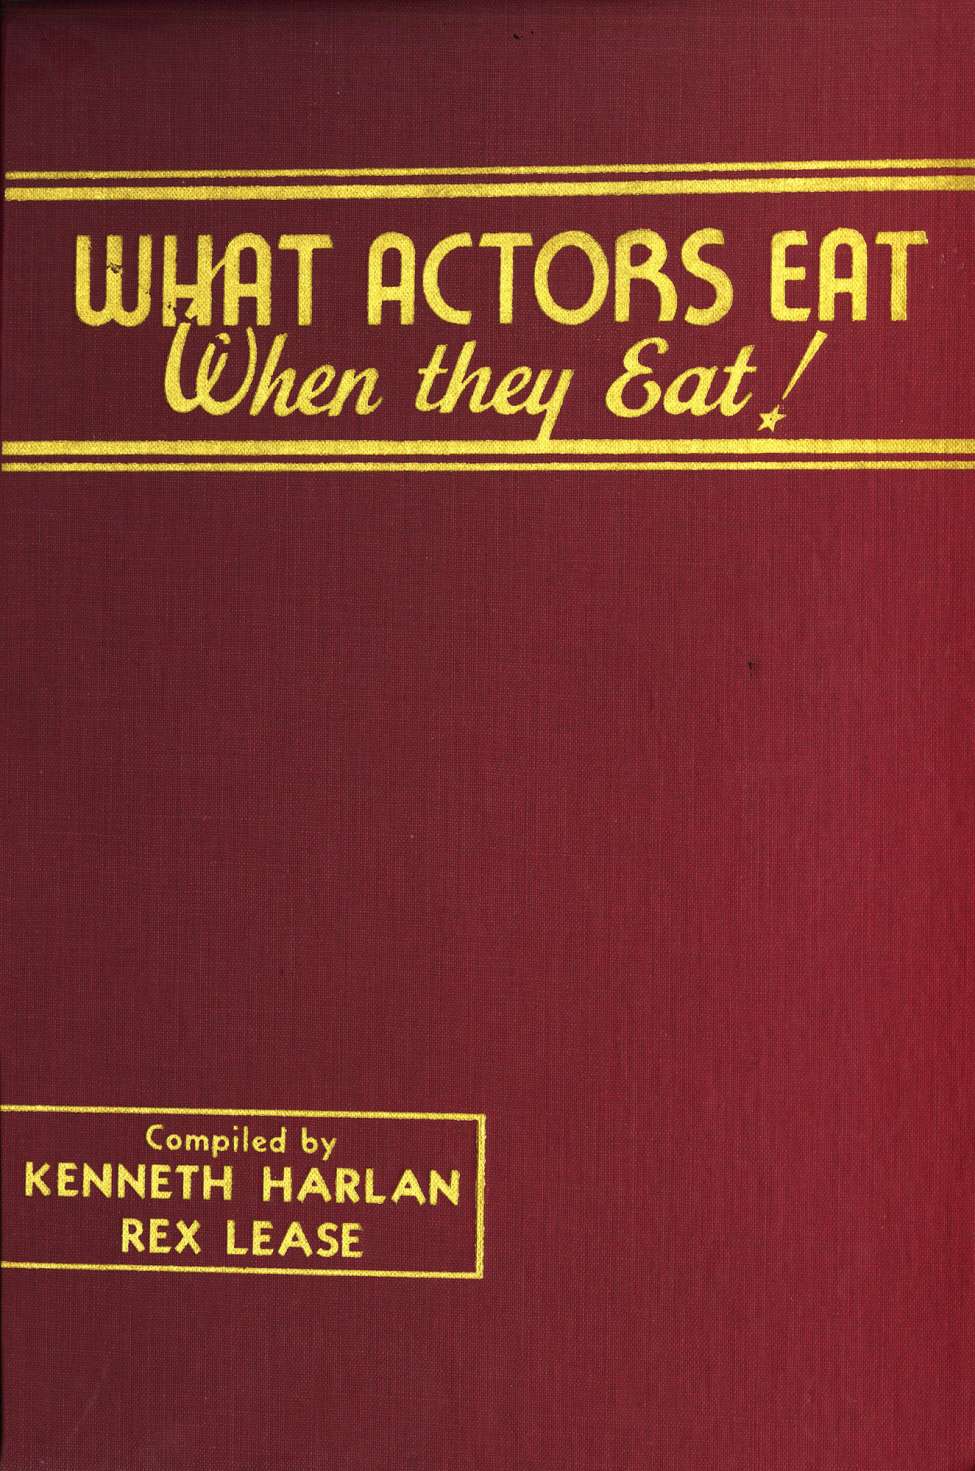 Comic Book Cover For What Actors Eat - When they Eat!